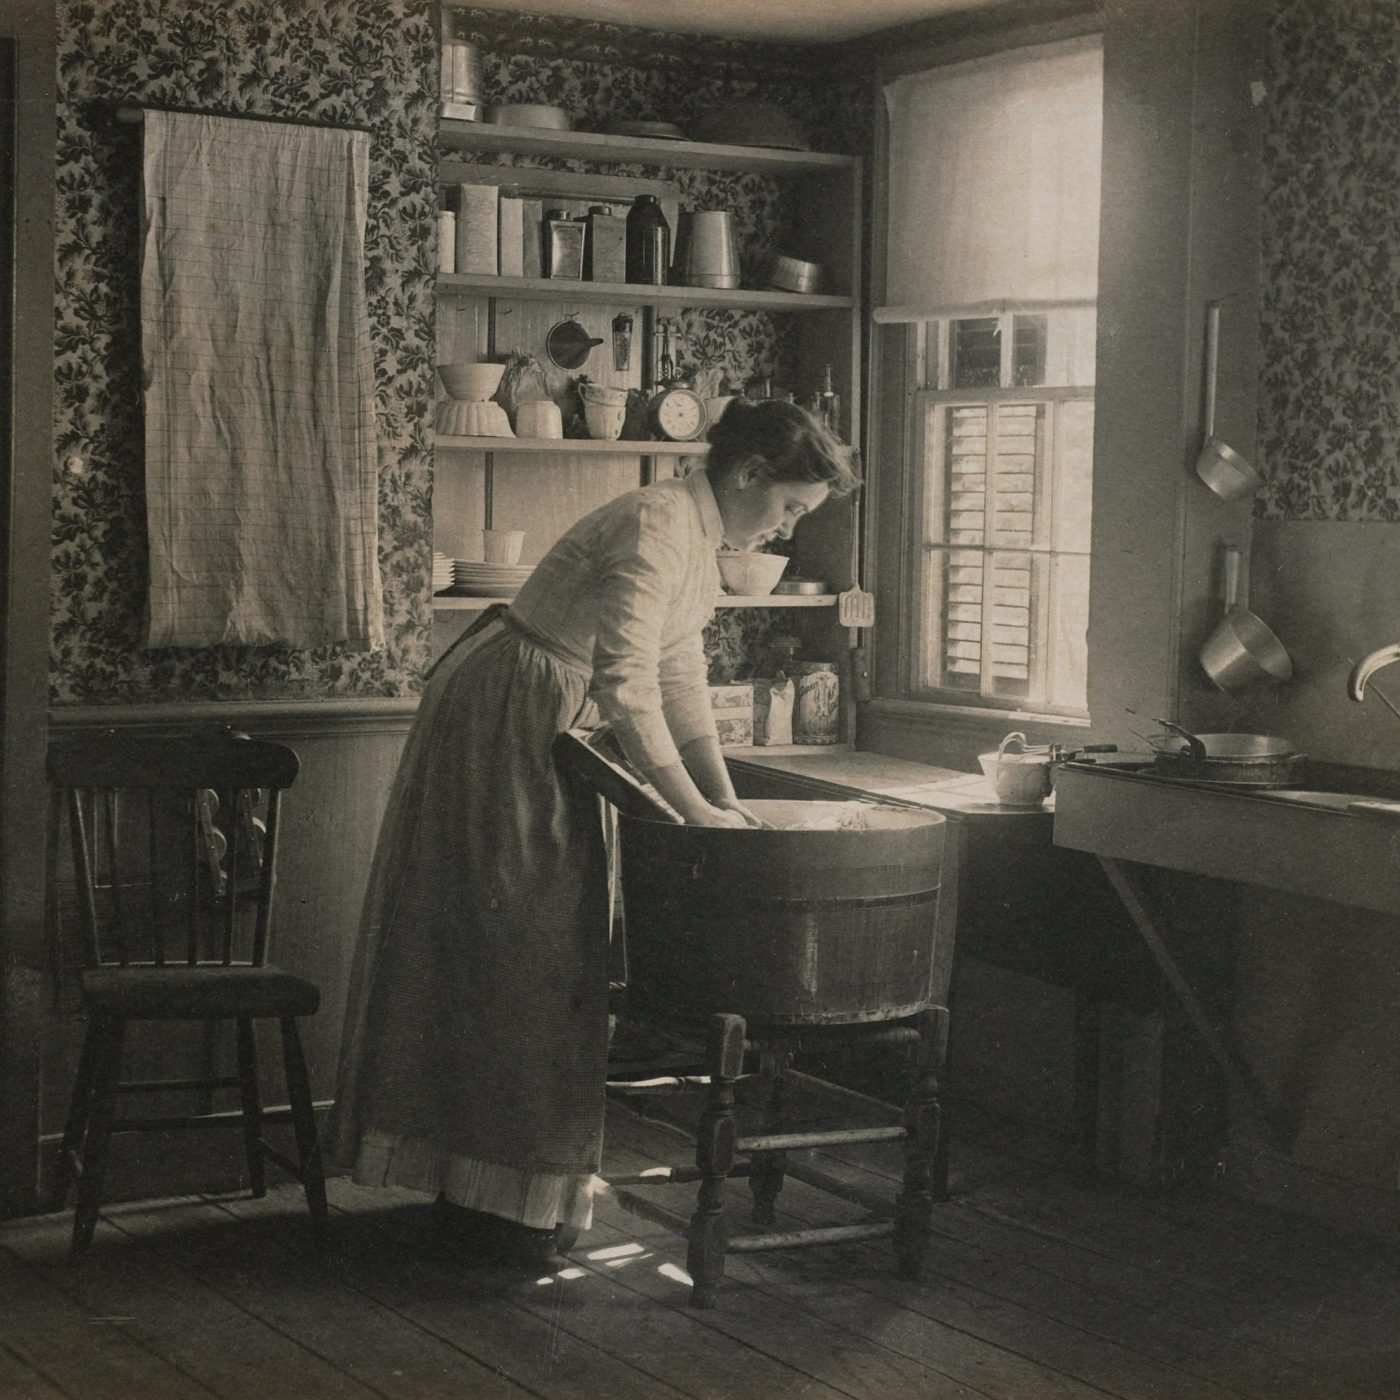 Antique photo of a woman washing or dyeing clothing